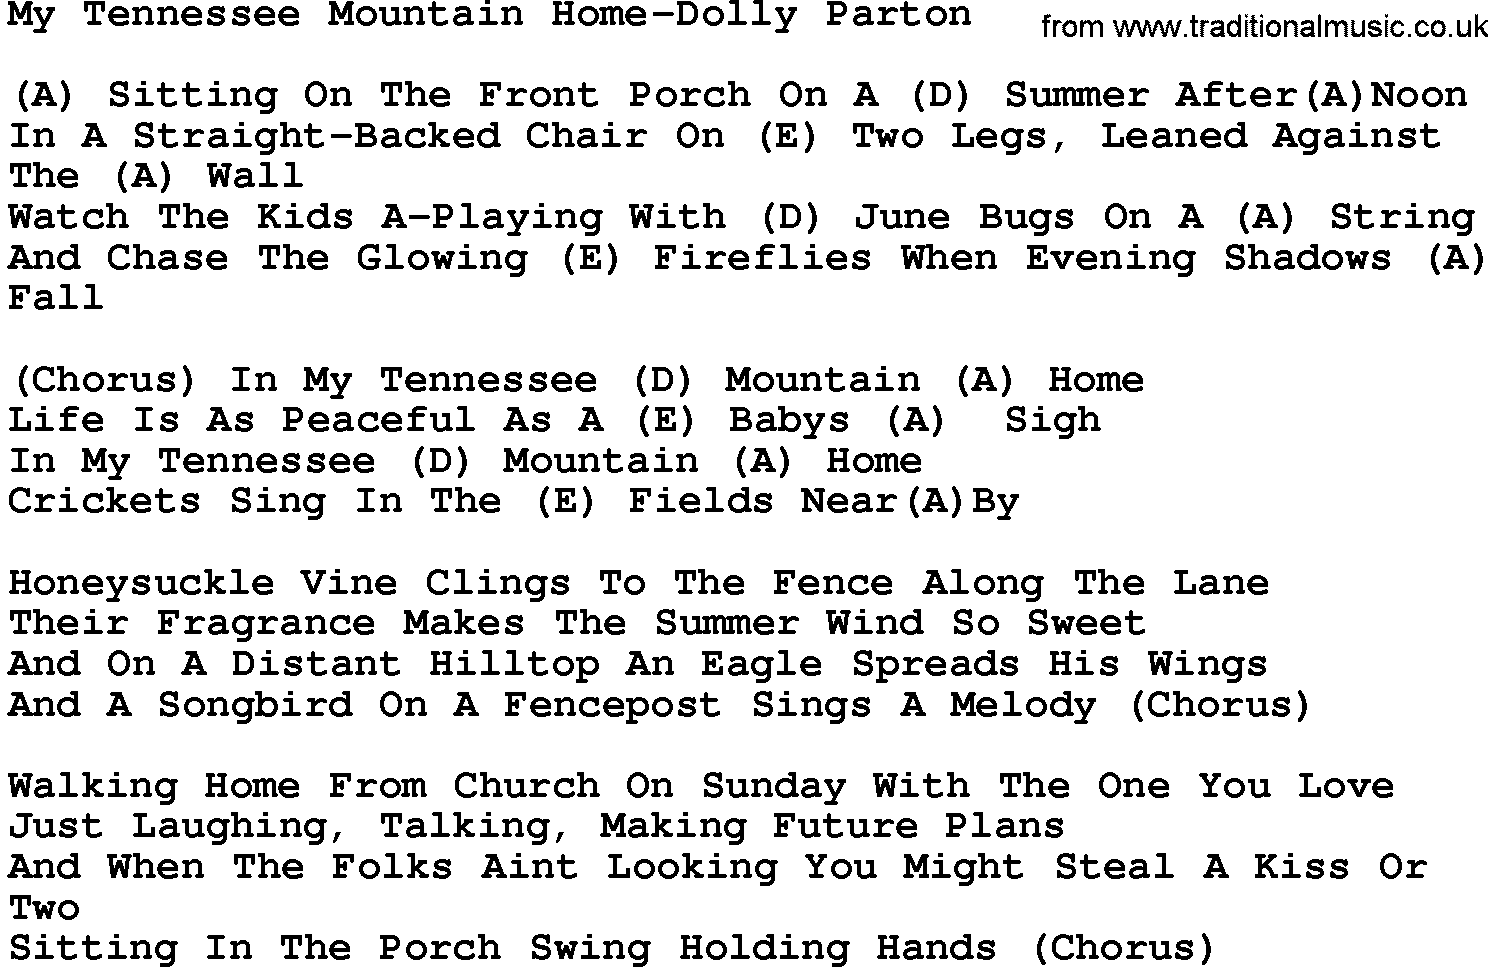 Country music song: My Tennessee Mountain Home-Dolly Parton lyrics and chords